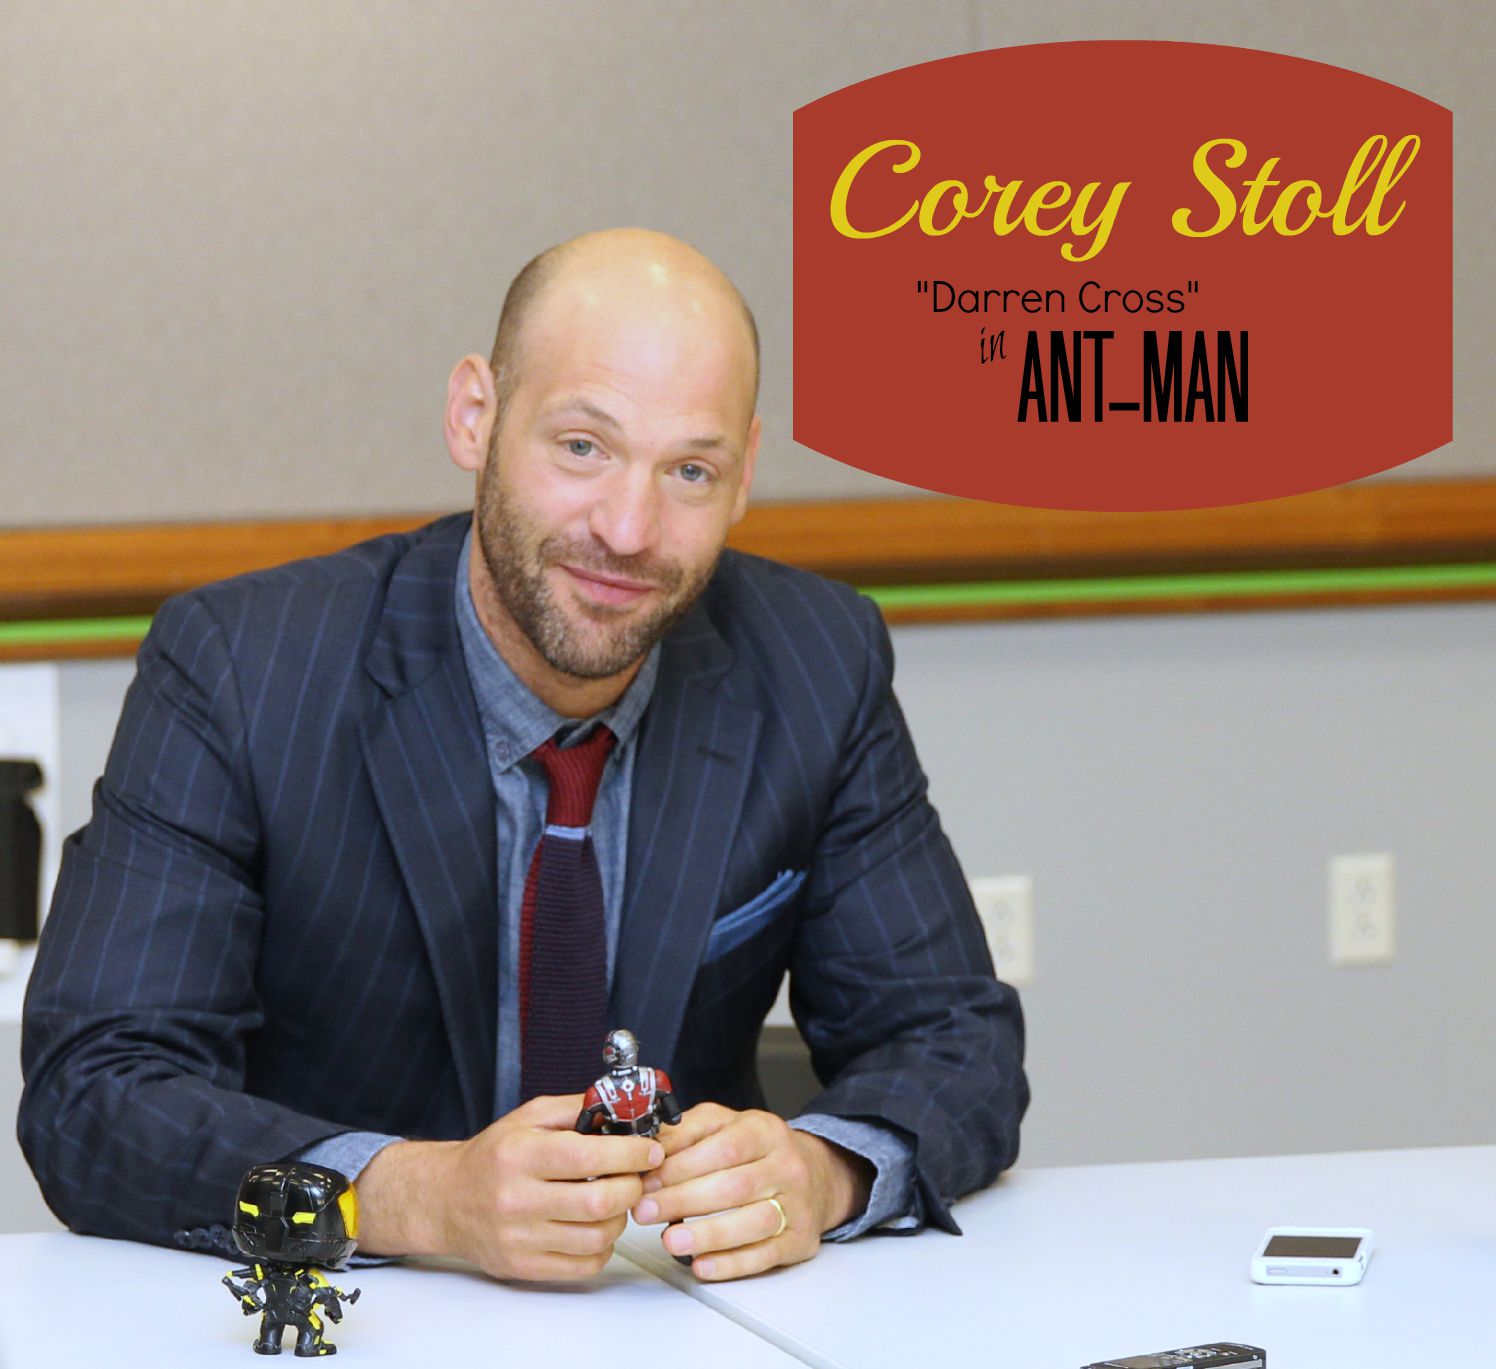 Hear what Corey Stoll thought about the Yellow Jacket Suit in Ant-Man #AntManEvent